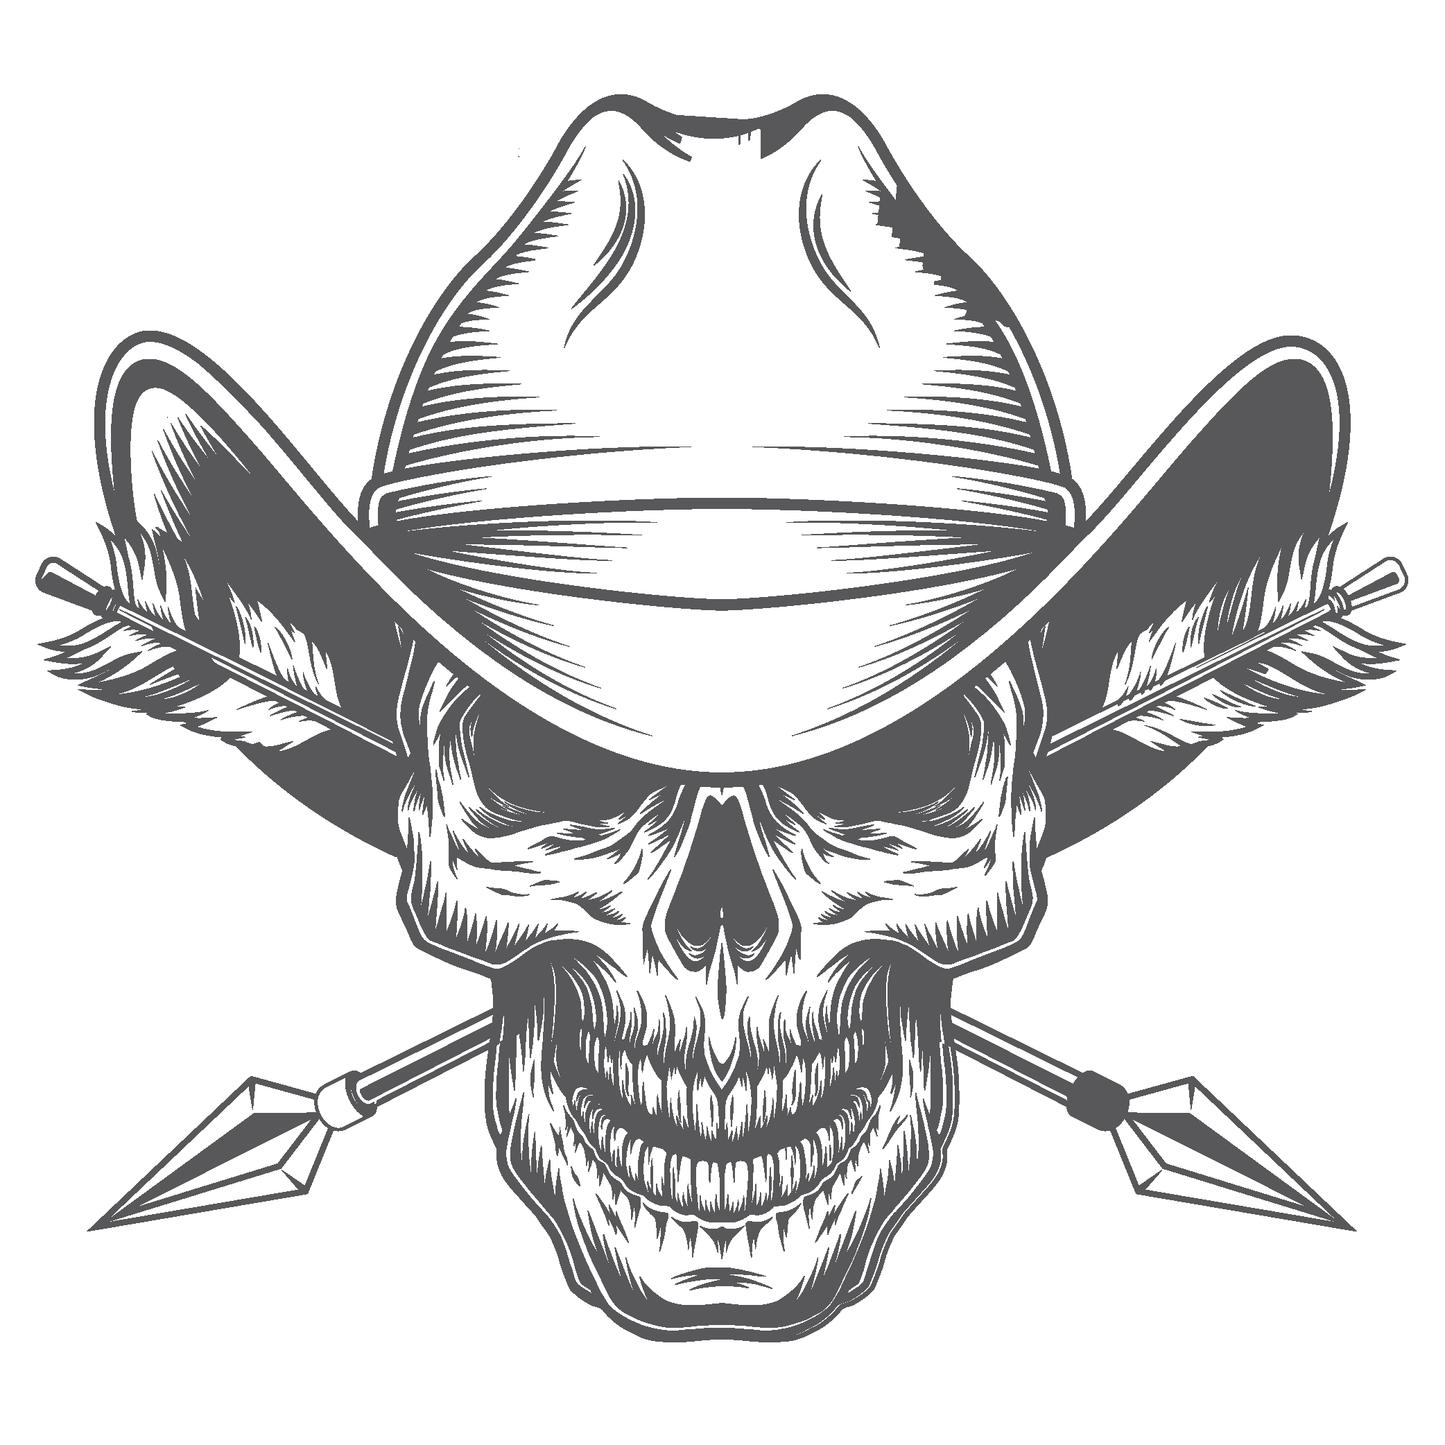 ShopVinylDesignStore.com Skull (Cowboy) and Arrows for Corn Hole Boards Wide Style 007 Shop Vinyl Design decals stickers